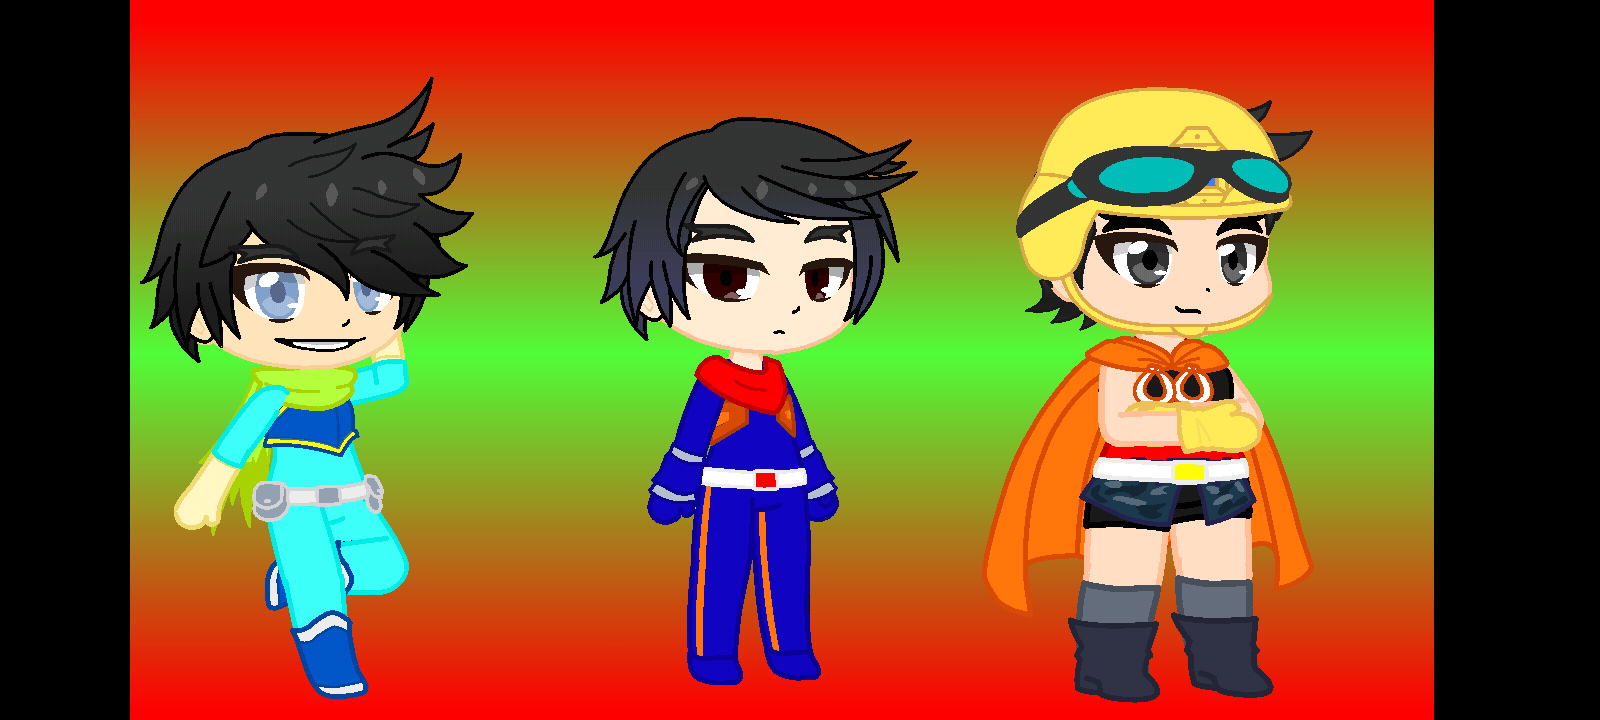 The Roblox Hackers In Gacha Club (NEW) by Minalhamid2726 on DeviantArt